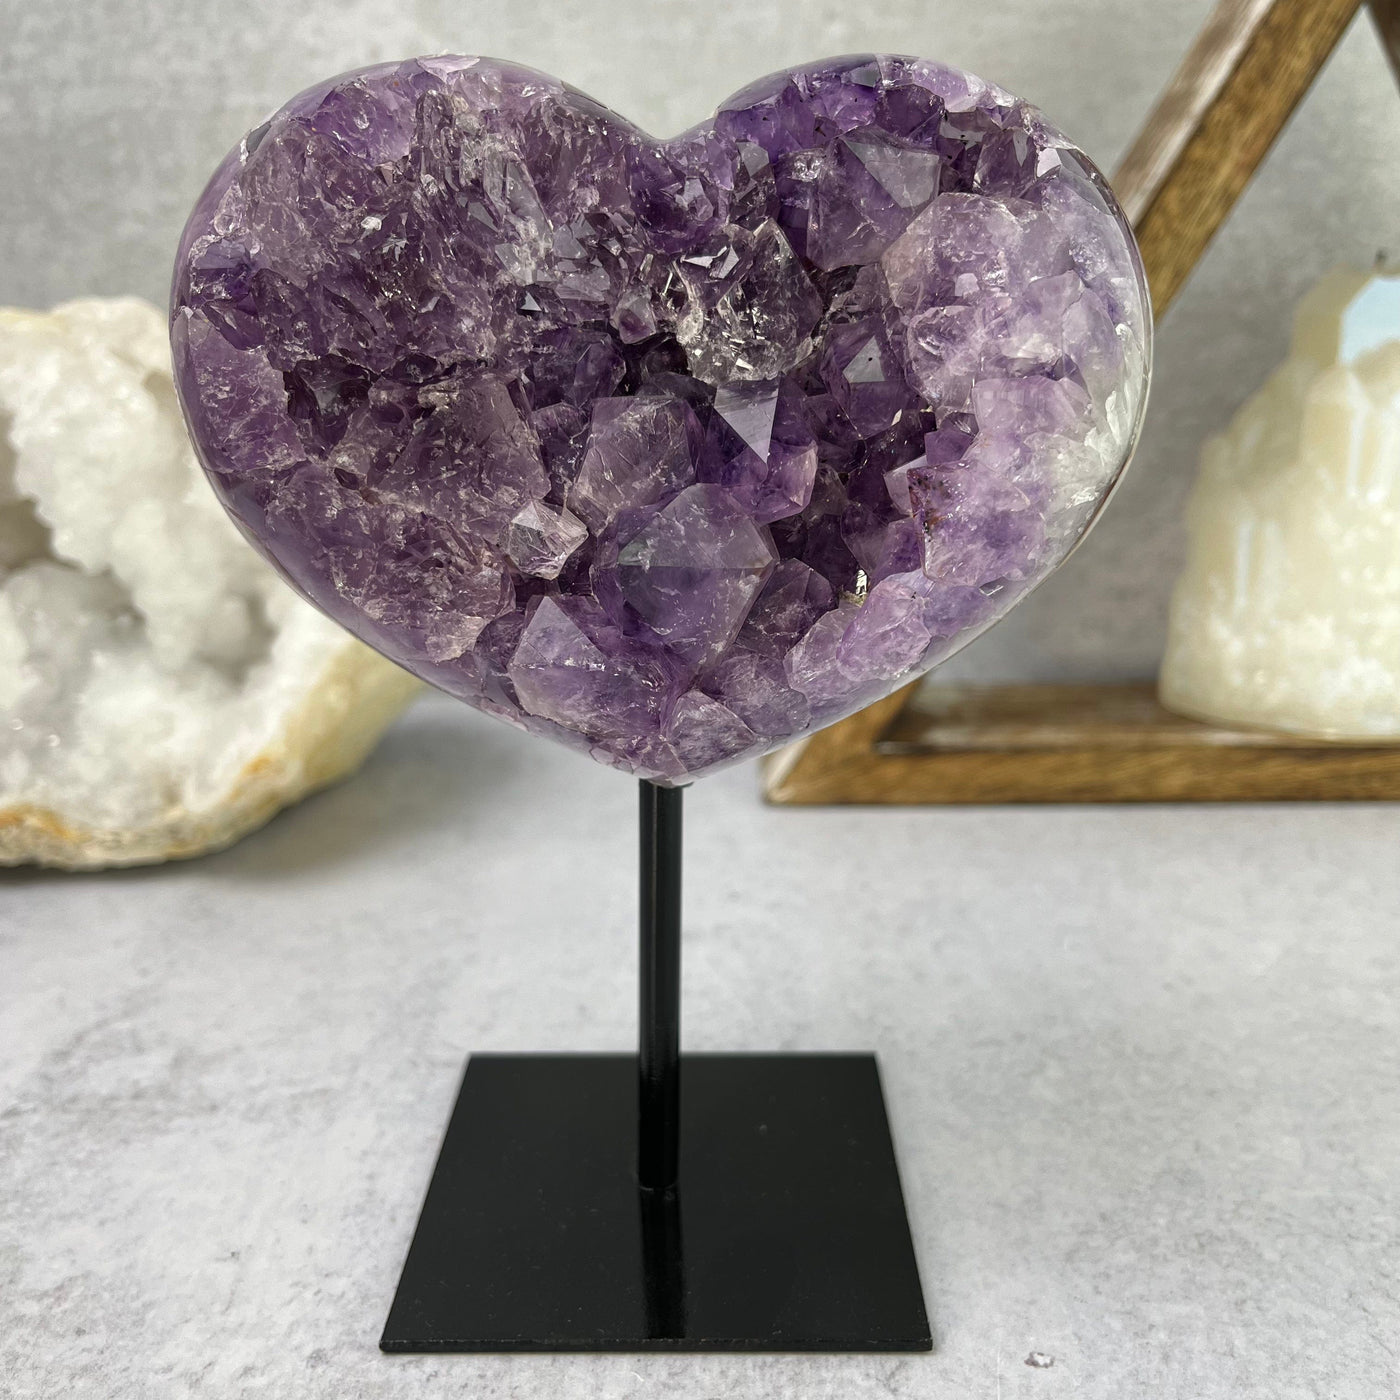  Amethyst Heart Cluster on Metal Stand - OOAK - Front View with home decor background